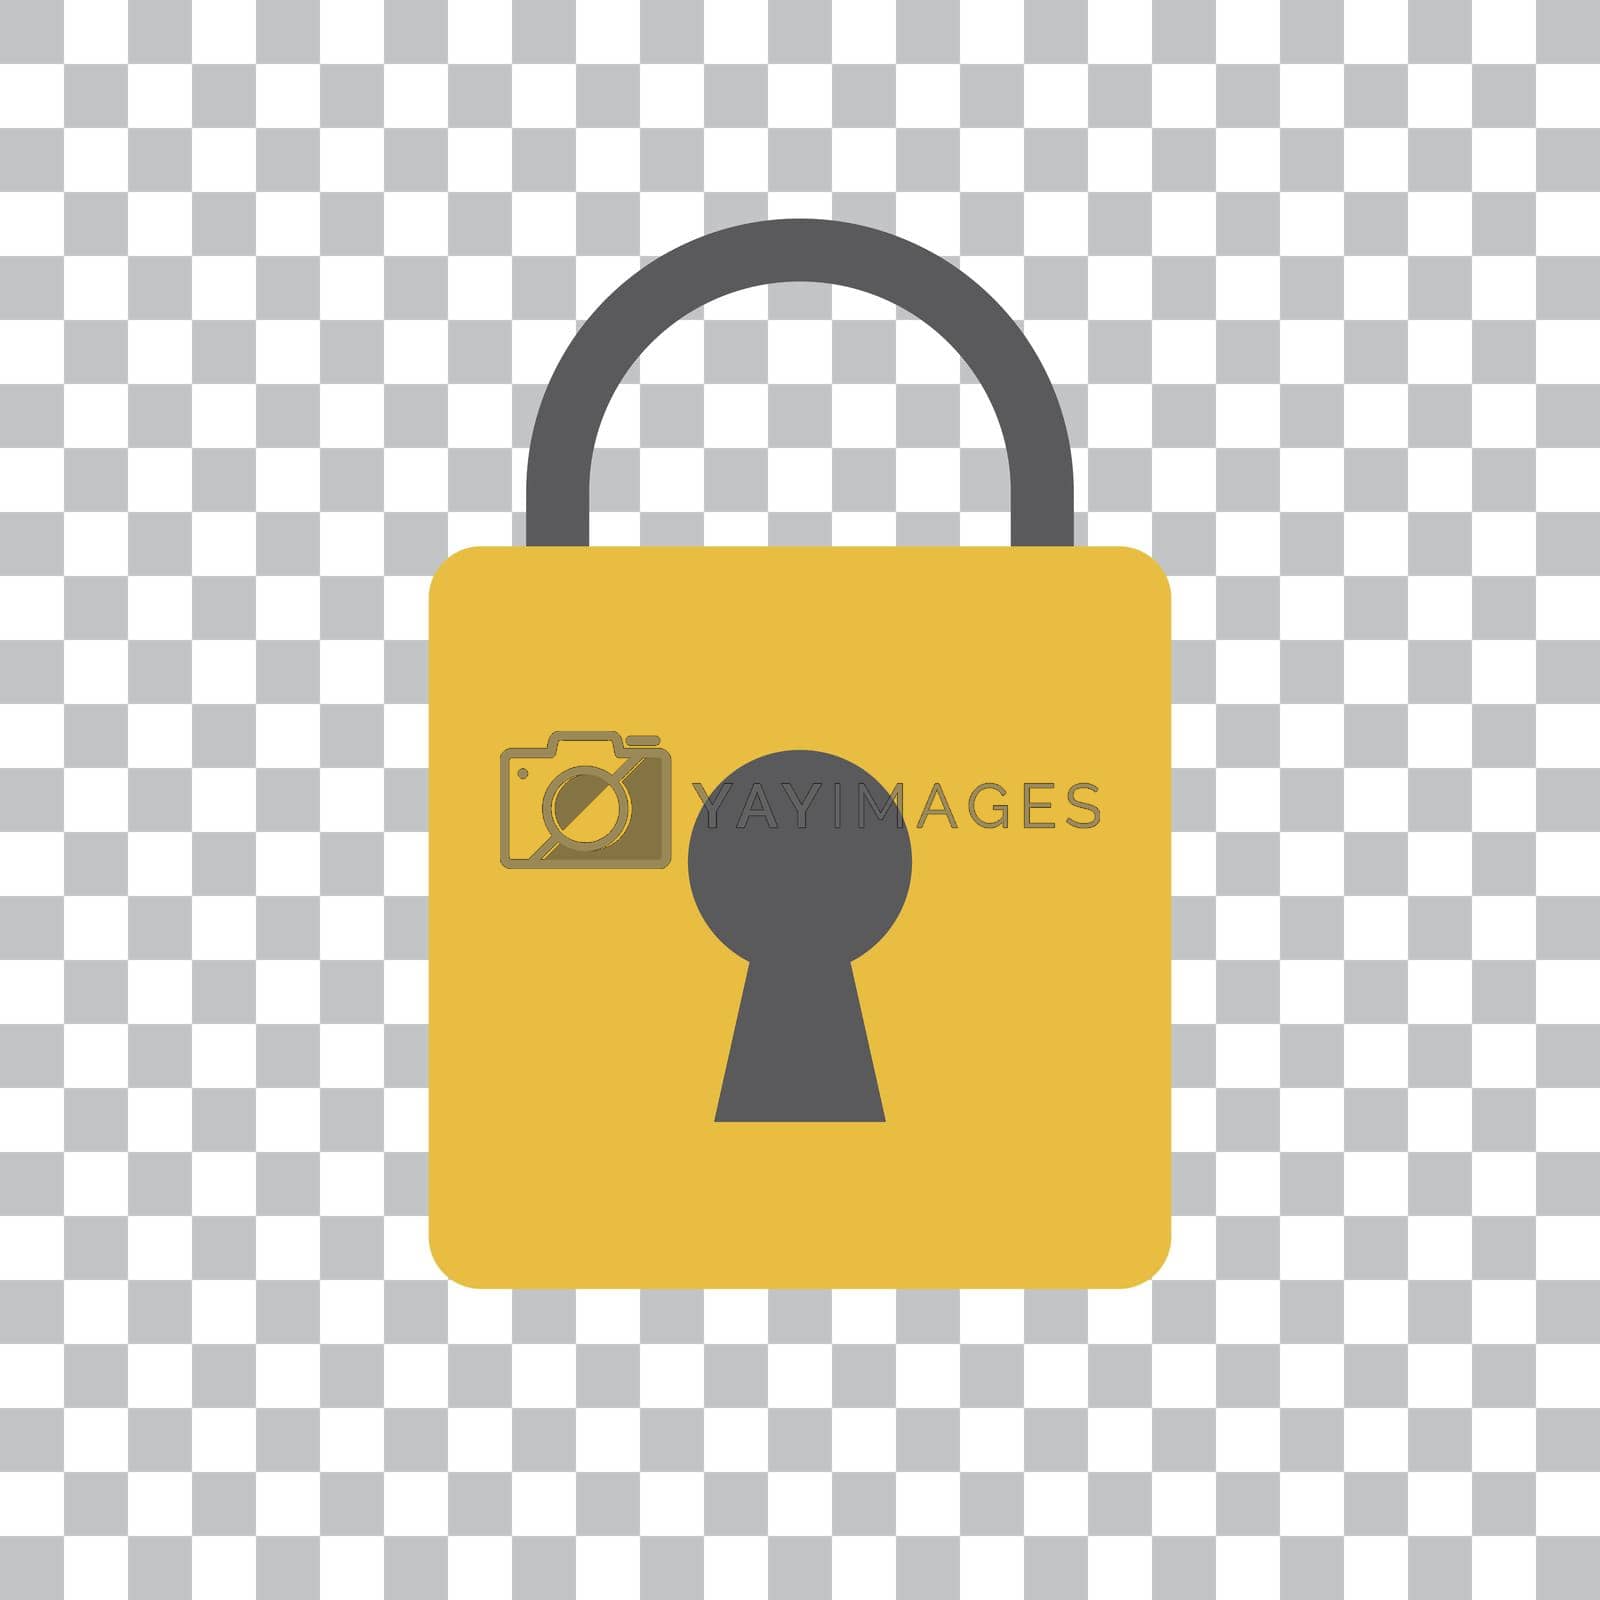 Royalty free image of Separated security icons on a transparent background. Padlock vector. by illust_monster